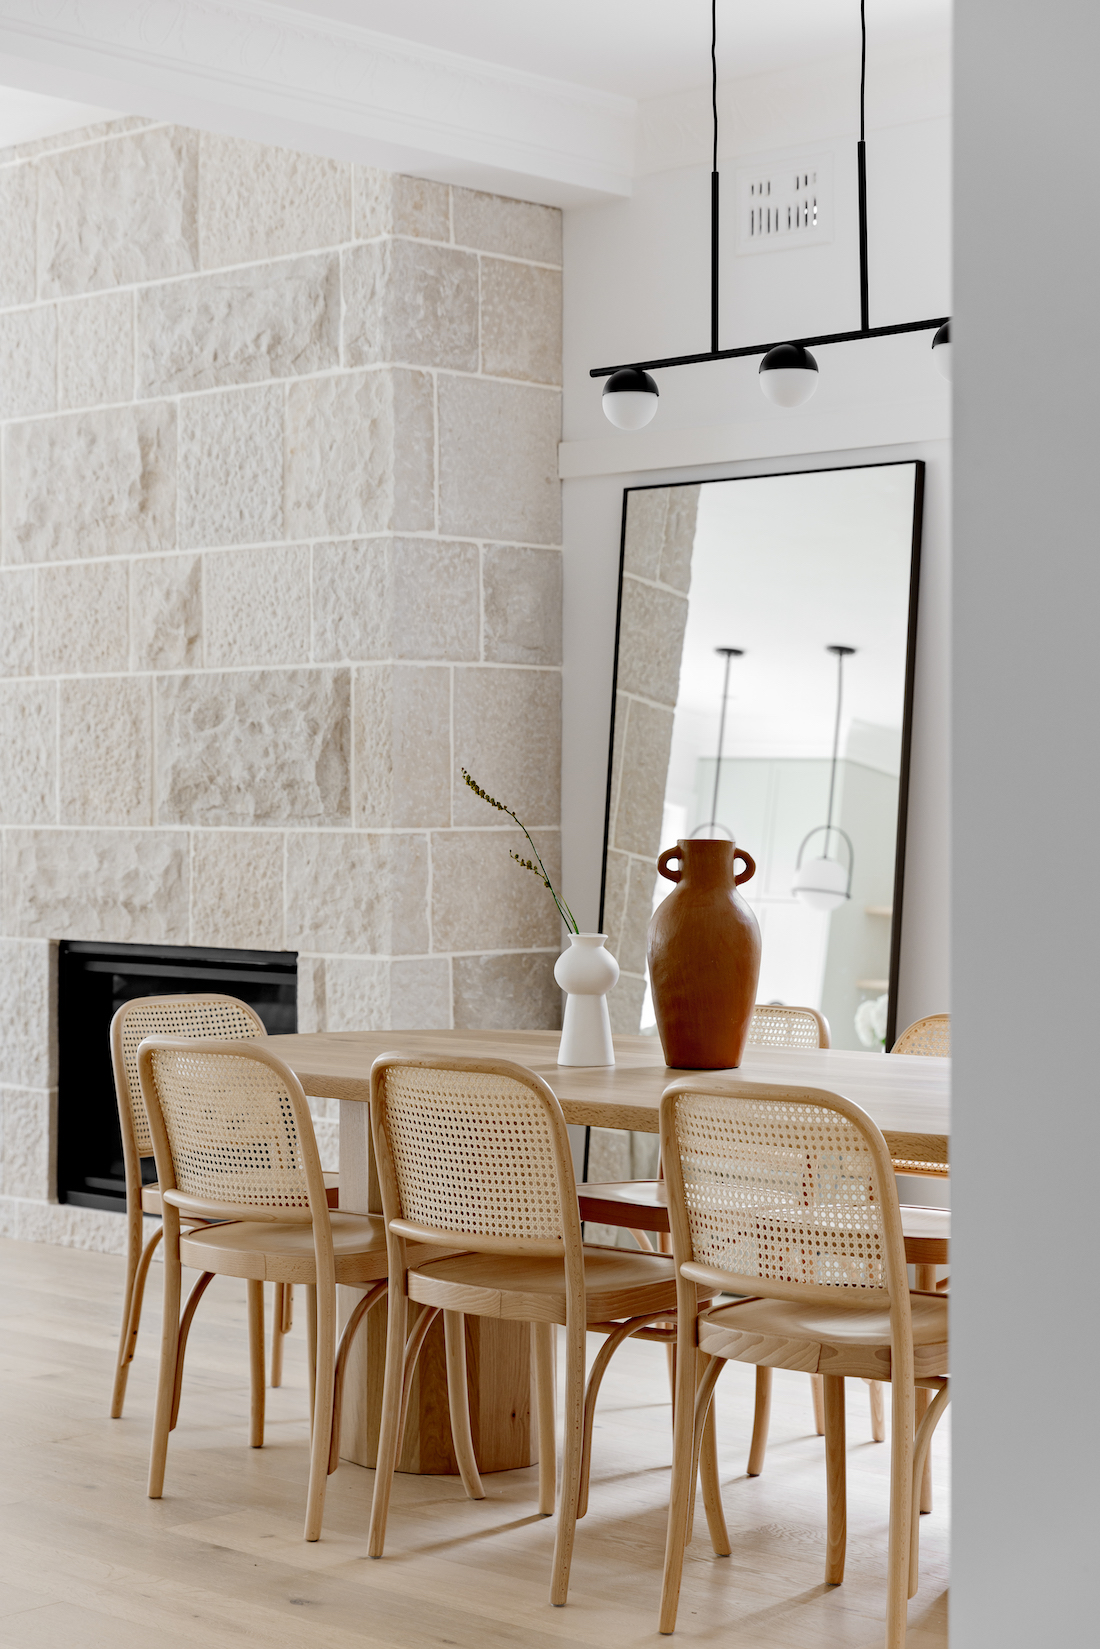 Rattan dining chairs with stone fireplace